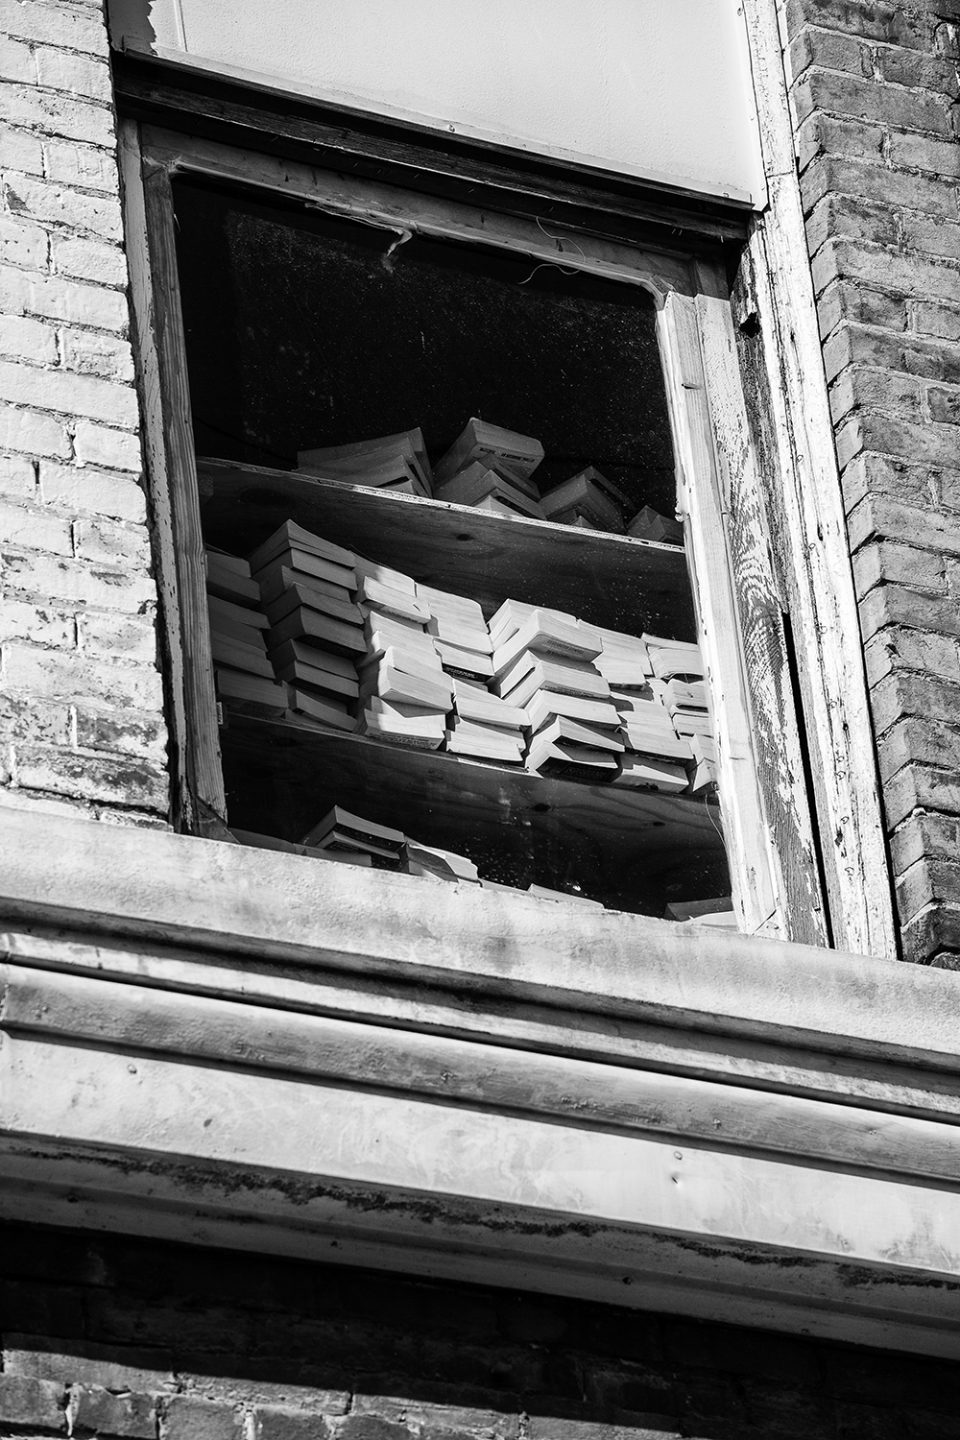 Stacks of books on a shelf on the second floor of an abandoned building. Black and white photograph by Keith Dotson.